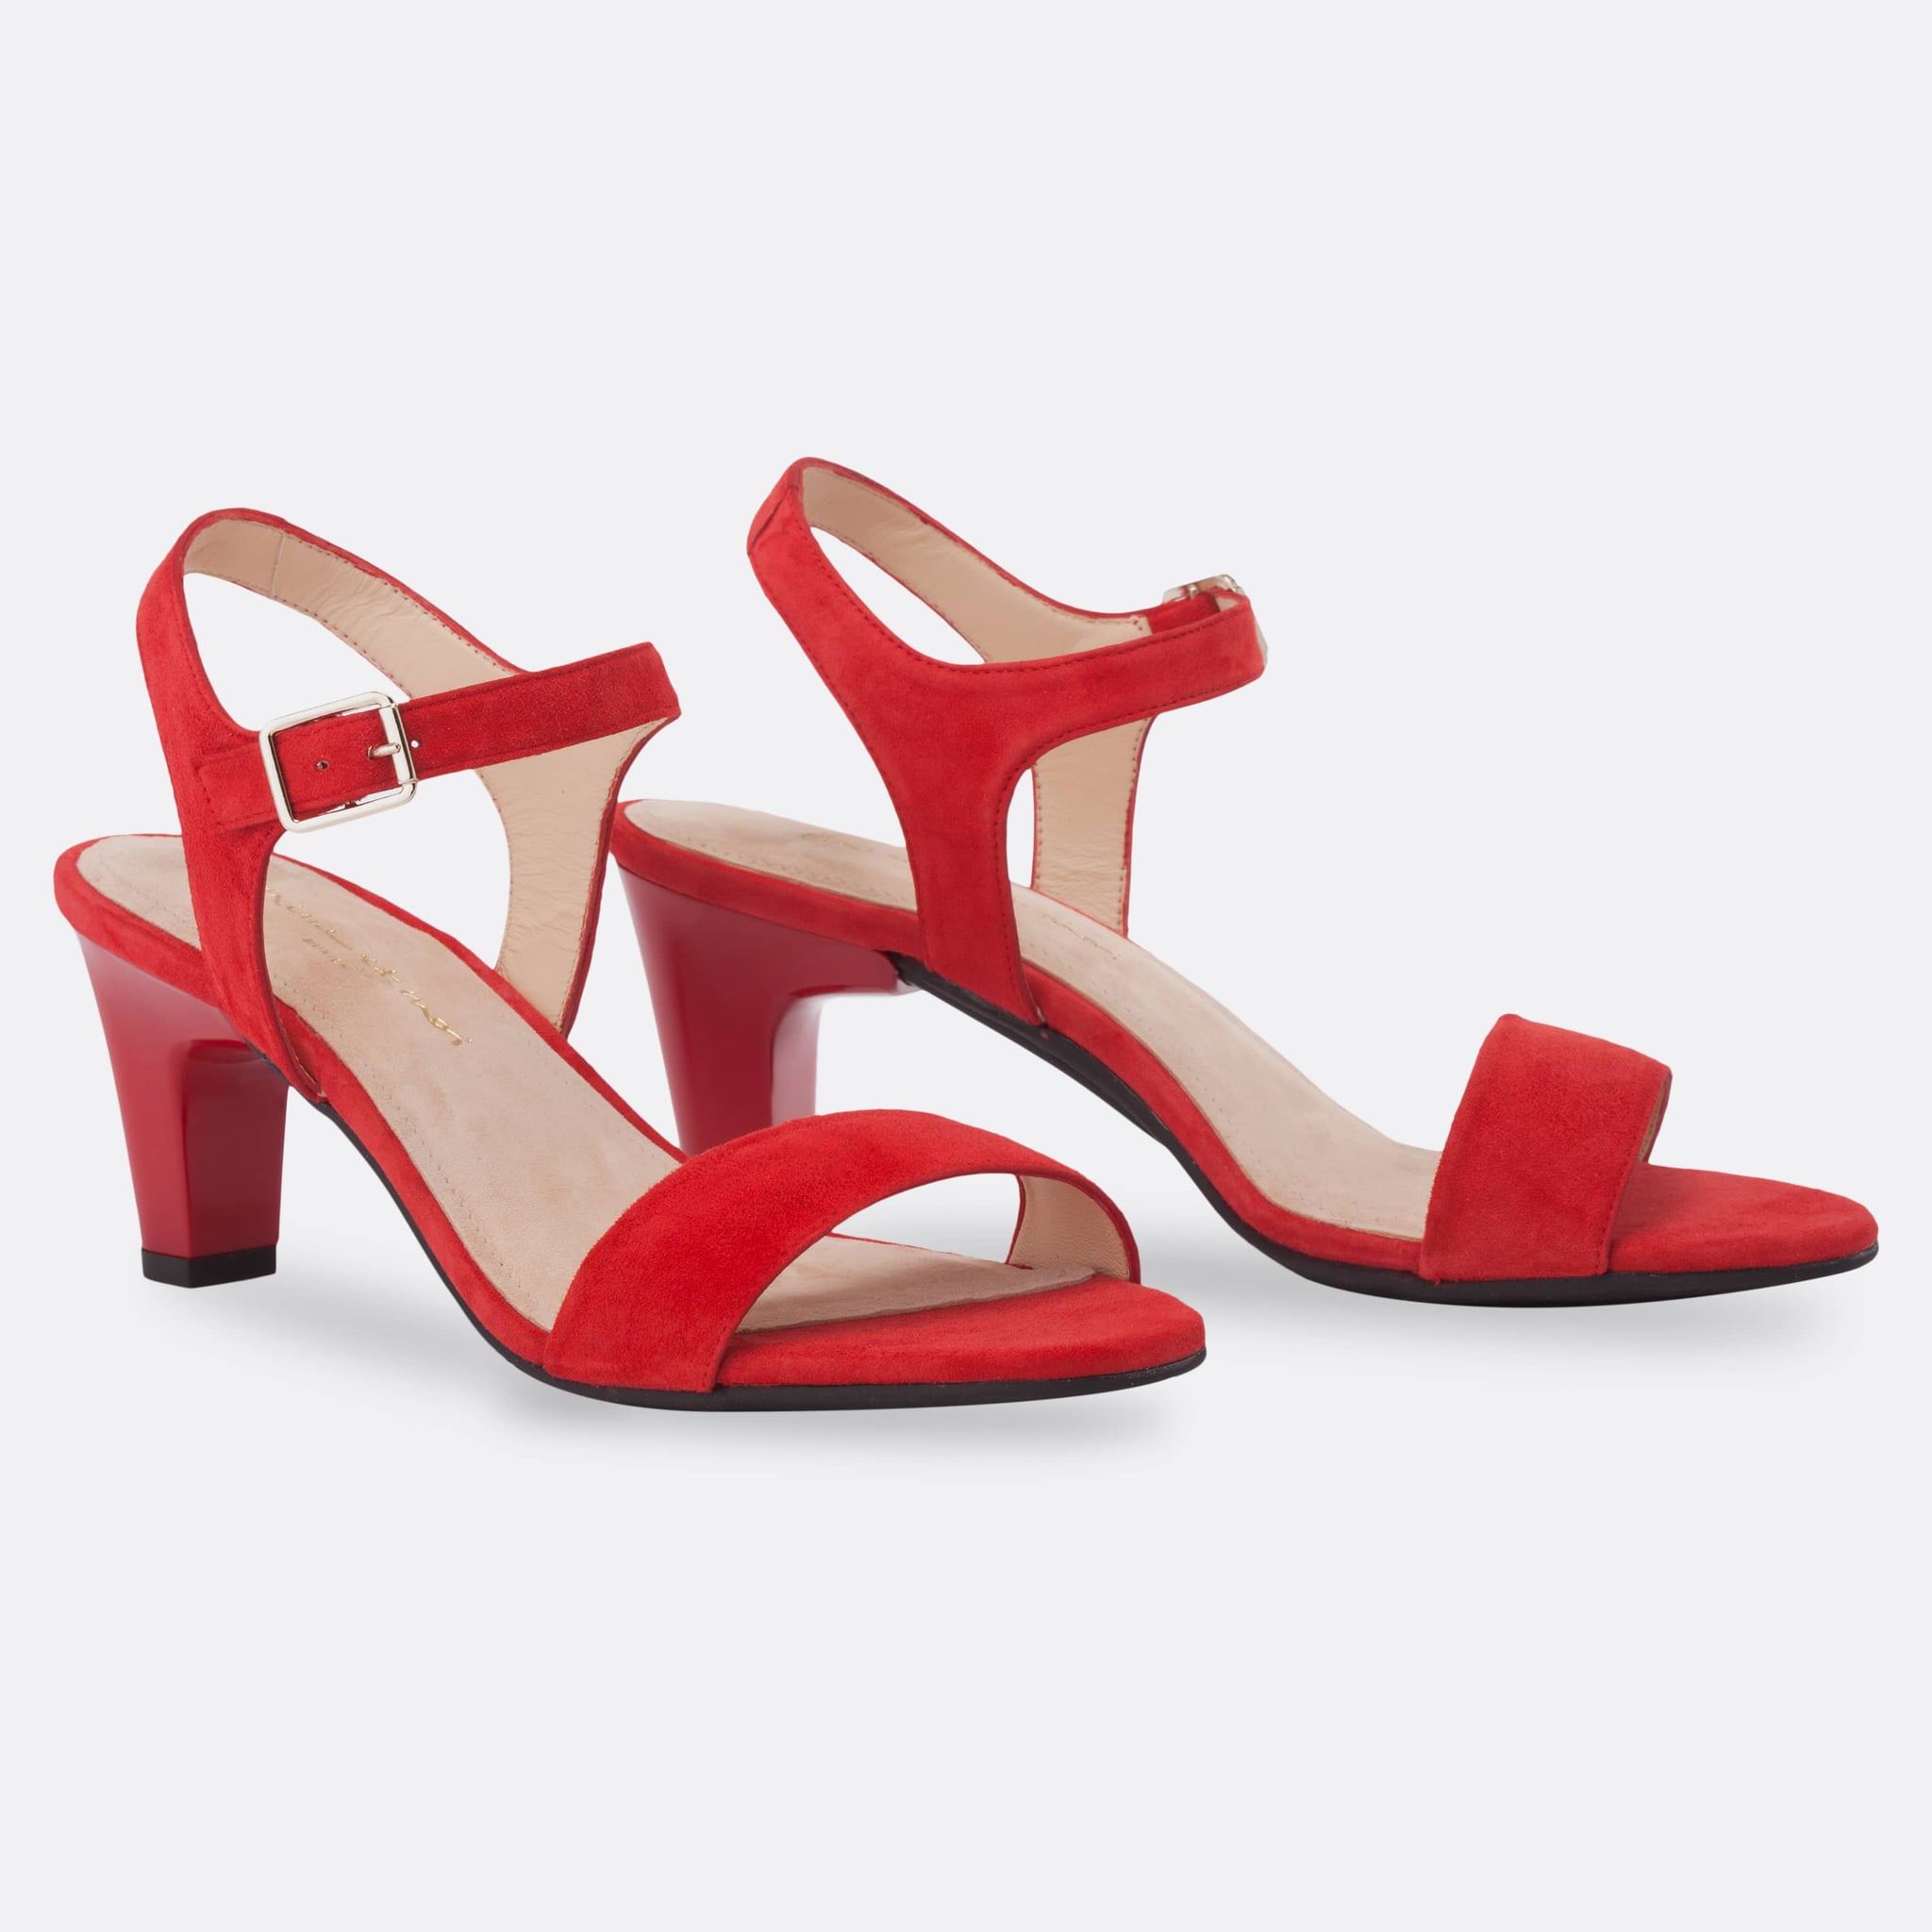 Poppy Red ($192) | This Shoe Can Go From a Heel to a Flat in Just 1 Second | Fashion Photo 3